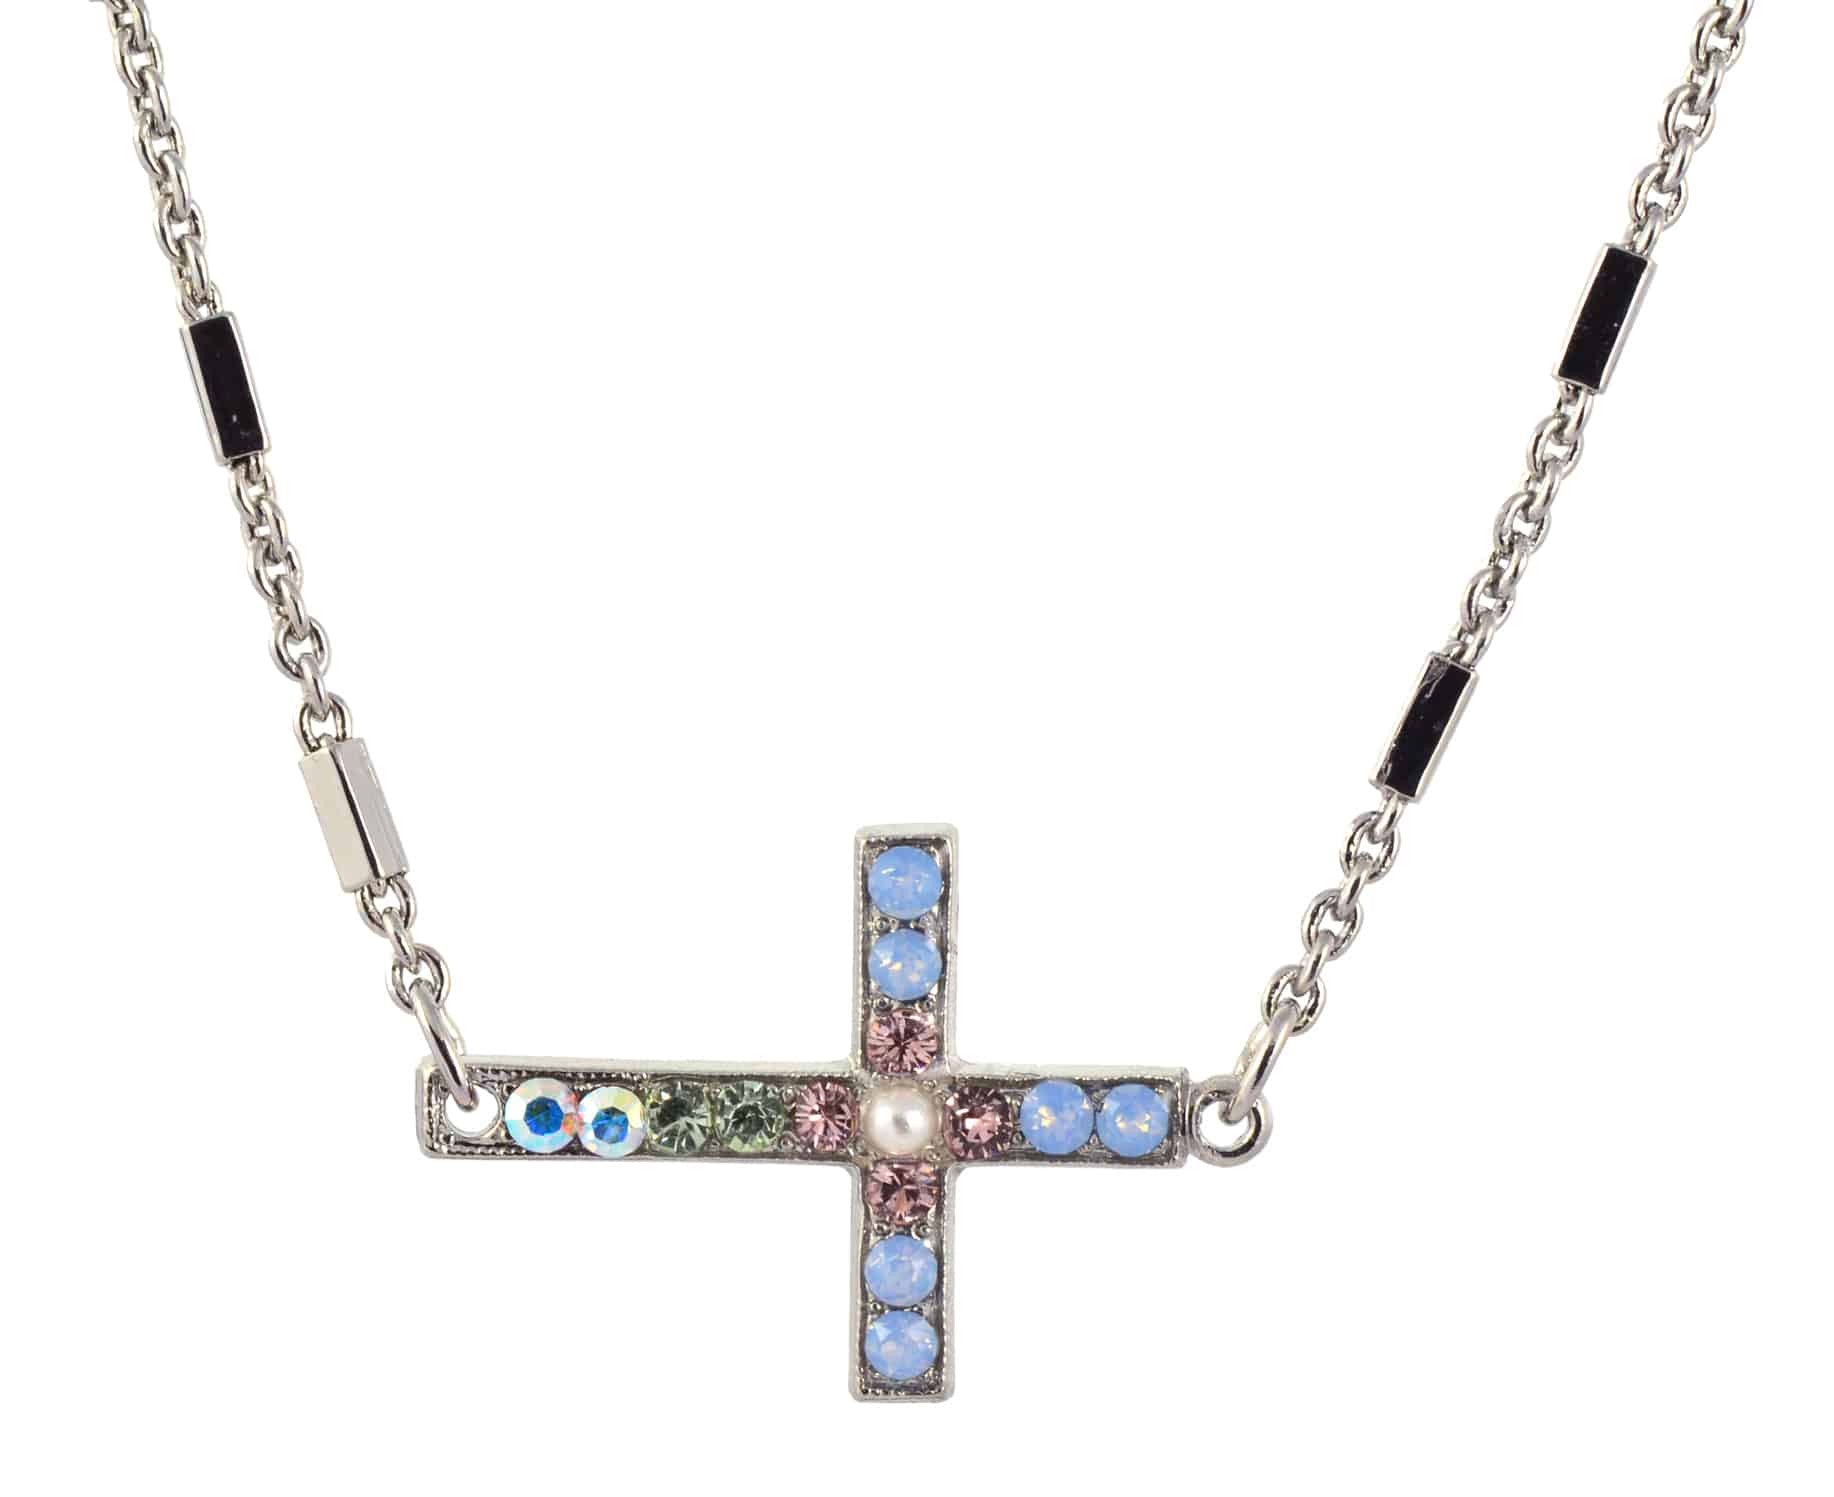 Aucoin Hart Jewelers Necklace SP12-34AB-SdWG | Aucoin Hart Jewelers